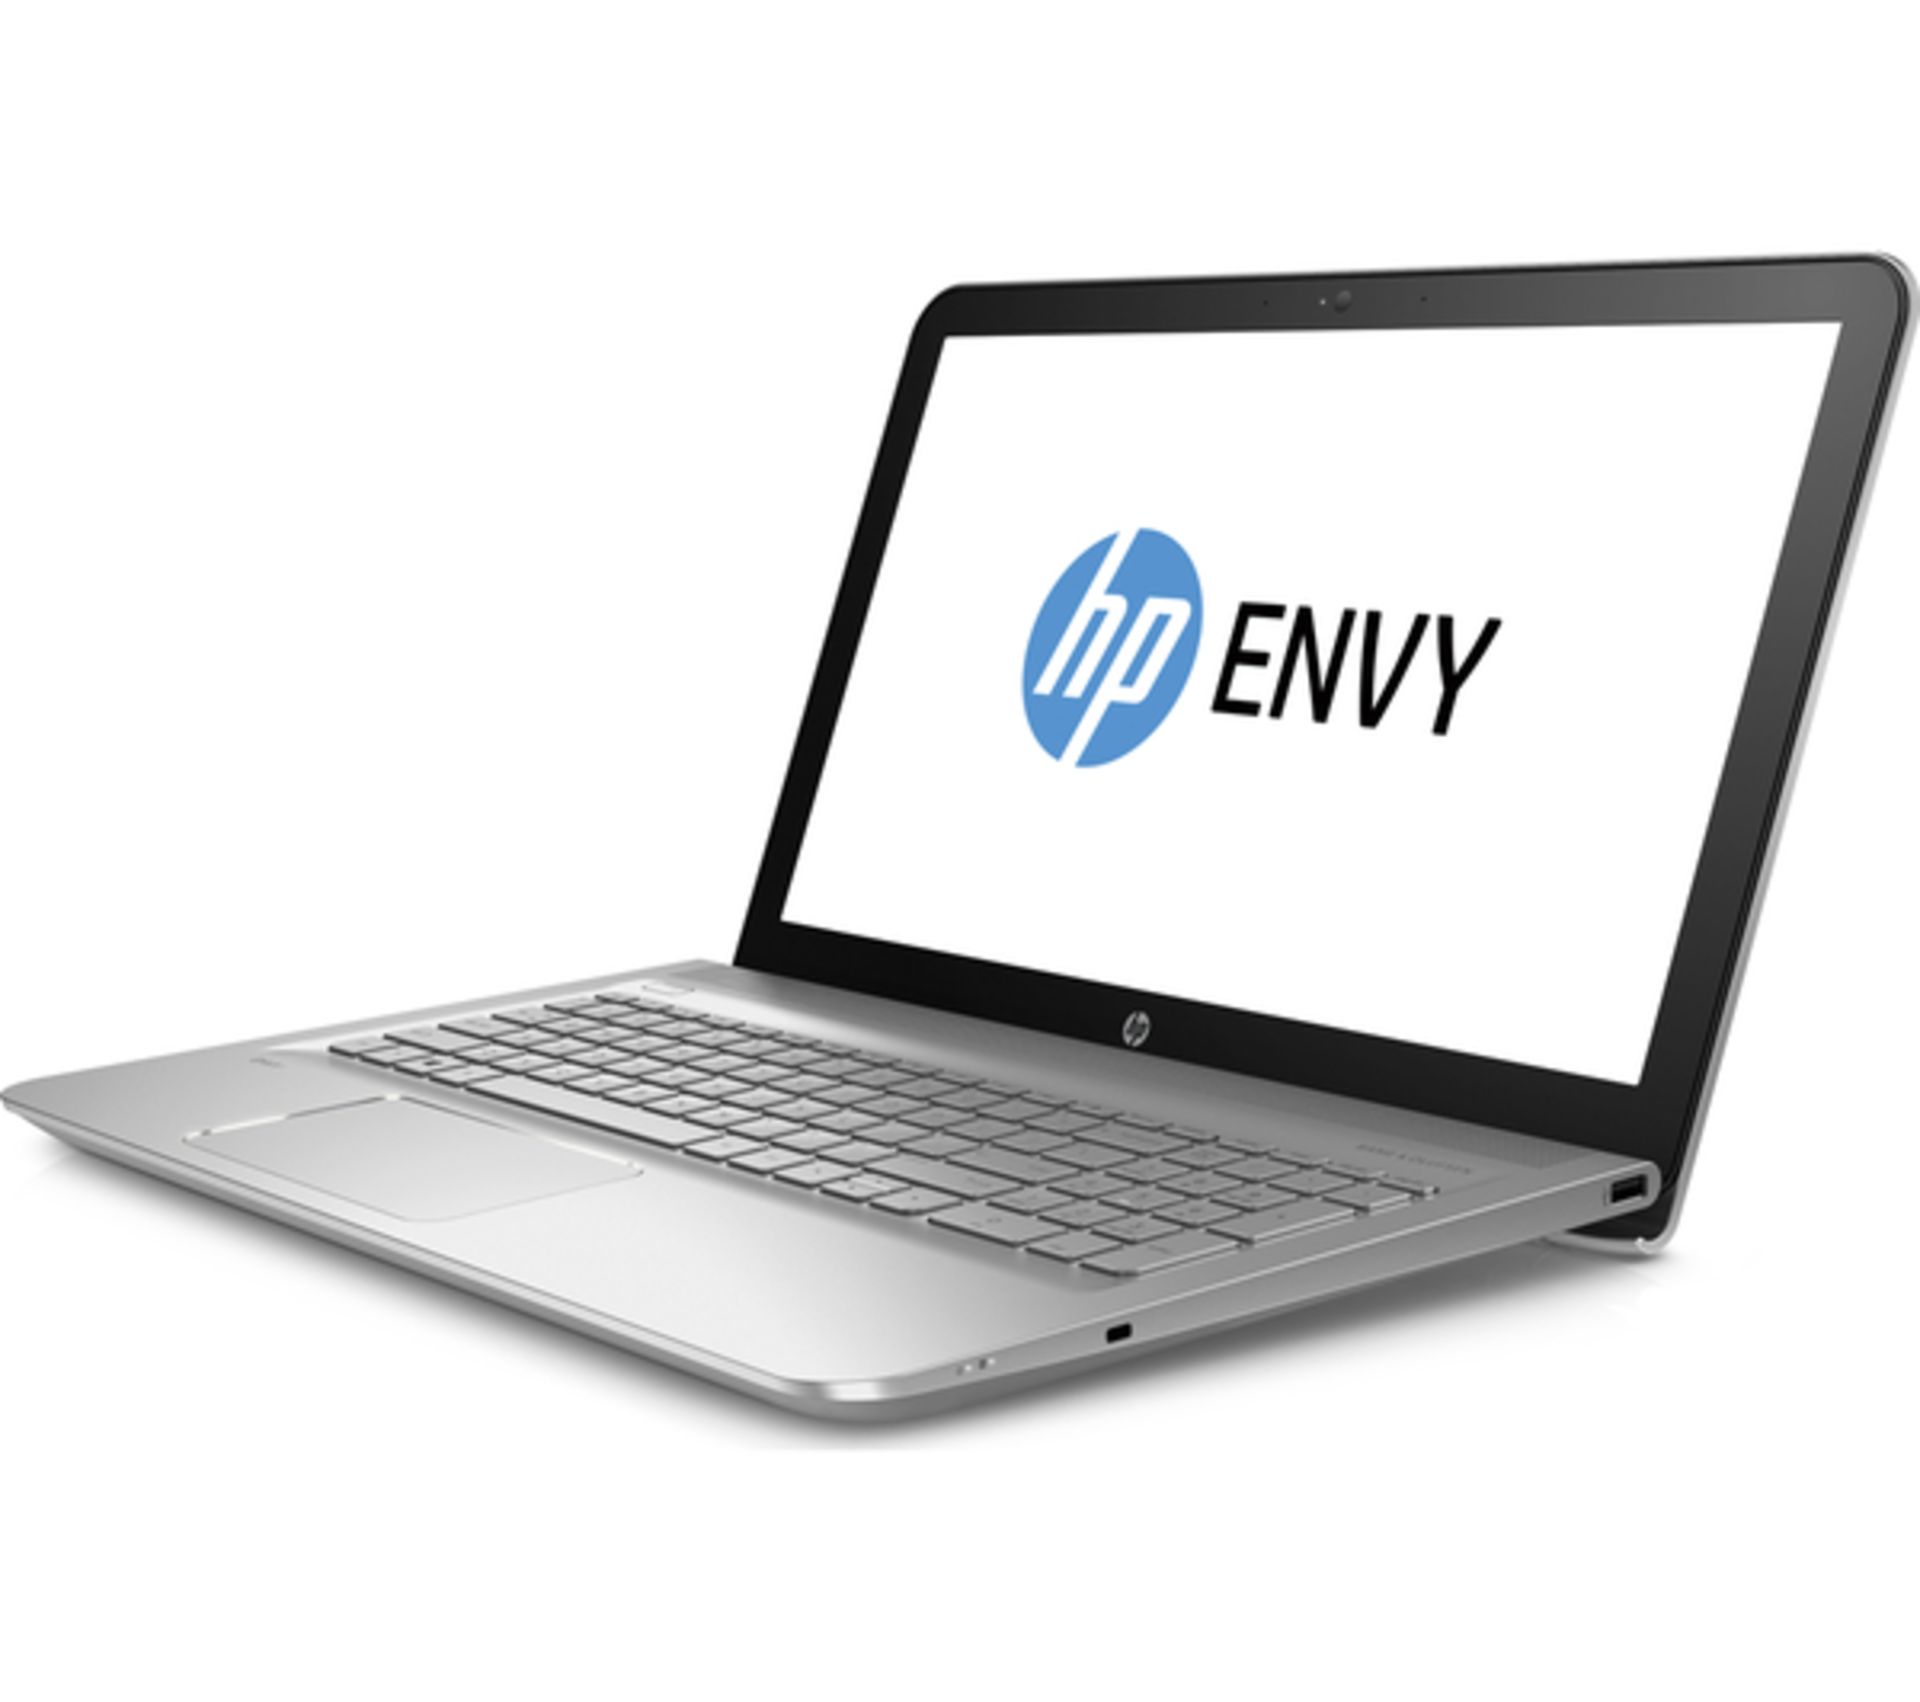 V Grade A HP Envy 15.6" Laptop With Bang & Olufsen Audio With Subwoofer - Quad Core AMD - Image 2 of 3